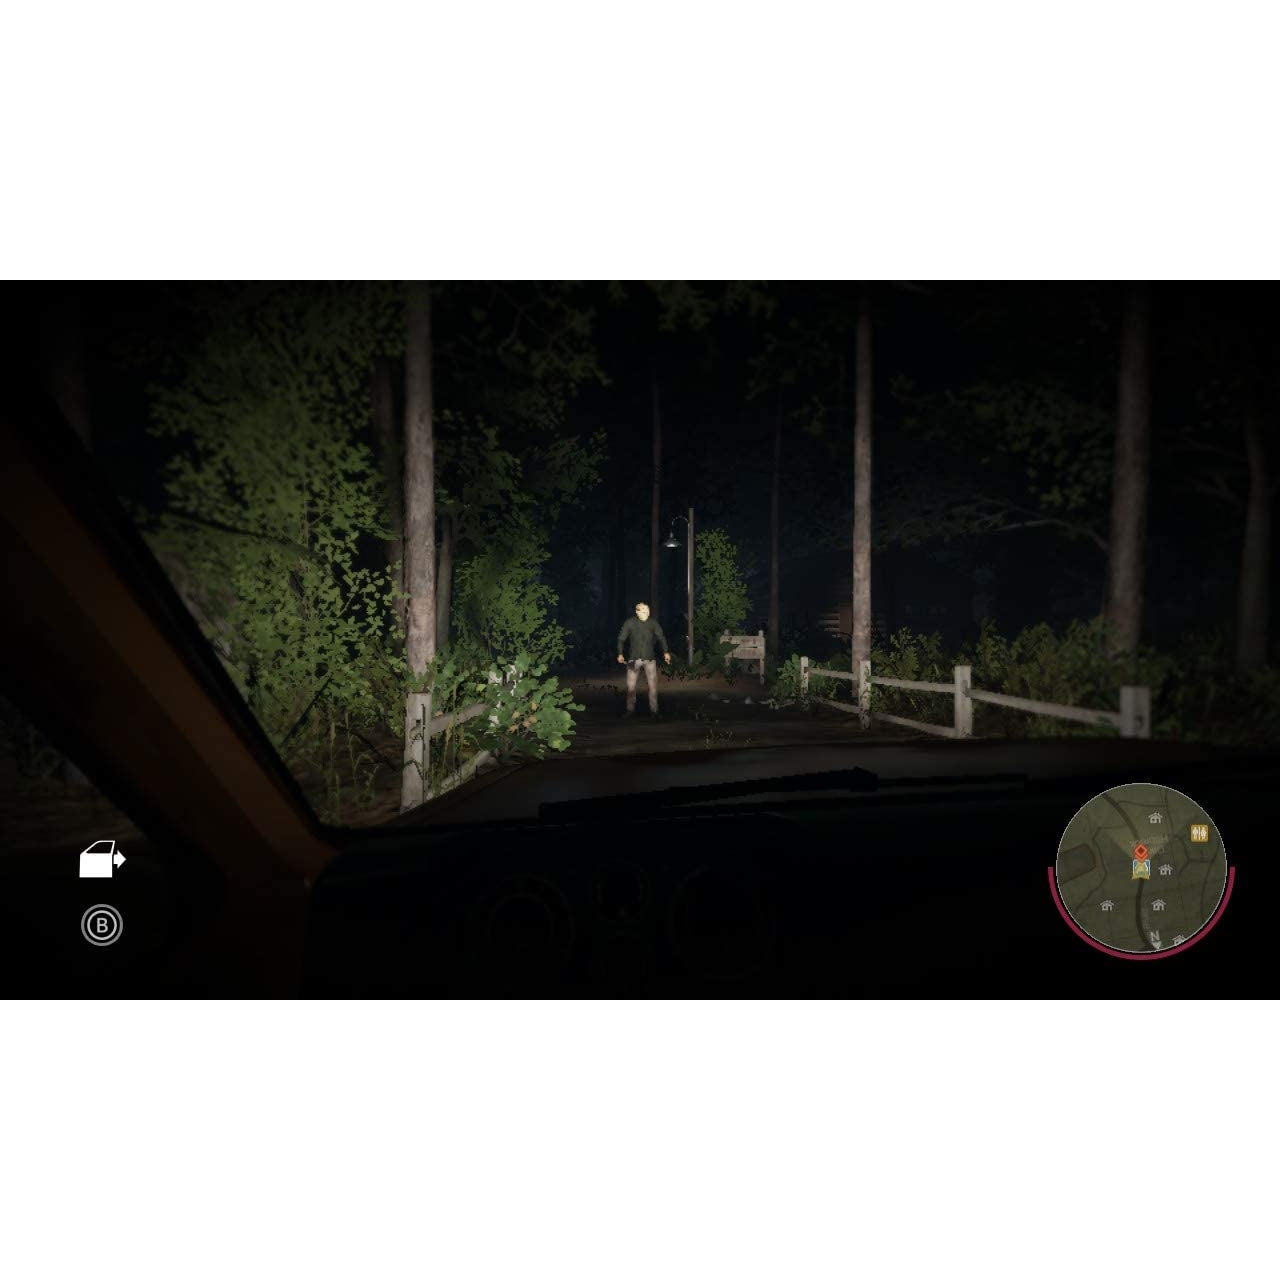 Friday the 13th: The Game - Ultimate Slasher Edition (Nintendo Switch)